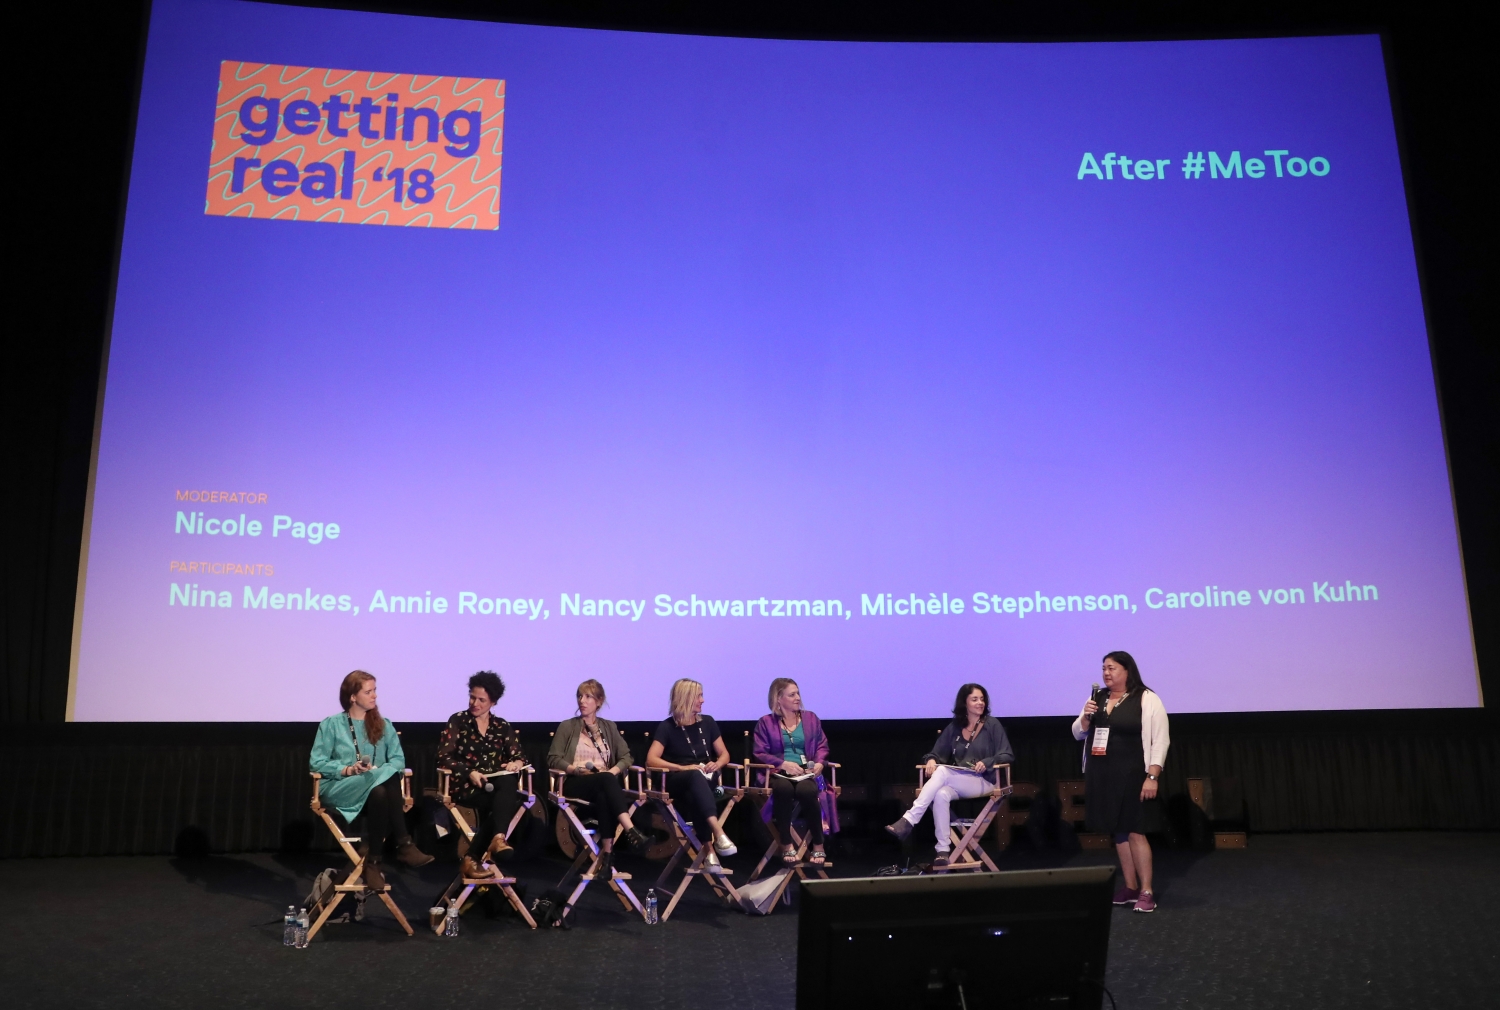 The "After #MeToo" session--Left to right: Carolyn von Kuhn/SFFILM; filmmaker Michele Stephenson; filmmaker Nancy Schwartzman; Annie Roney/ro*co films; filmmaker Nina Menkes; moderator Nicole Page; Claire Aquilar/IDA. Photo by Susan Yin